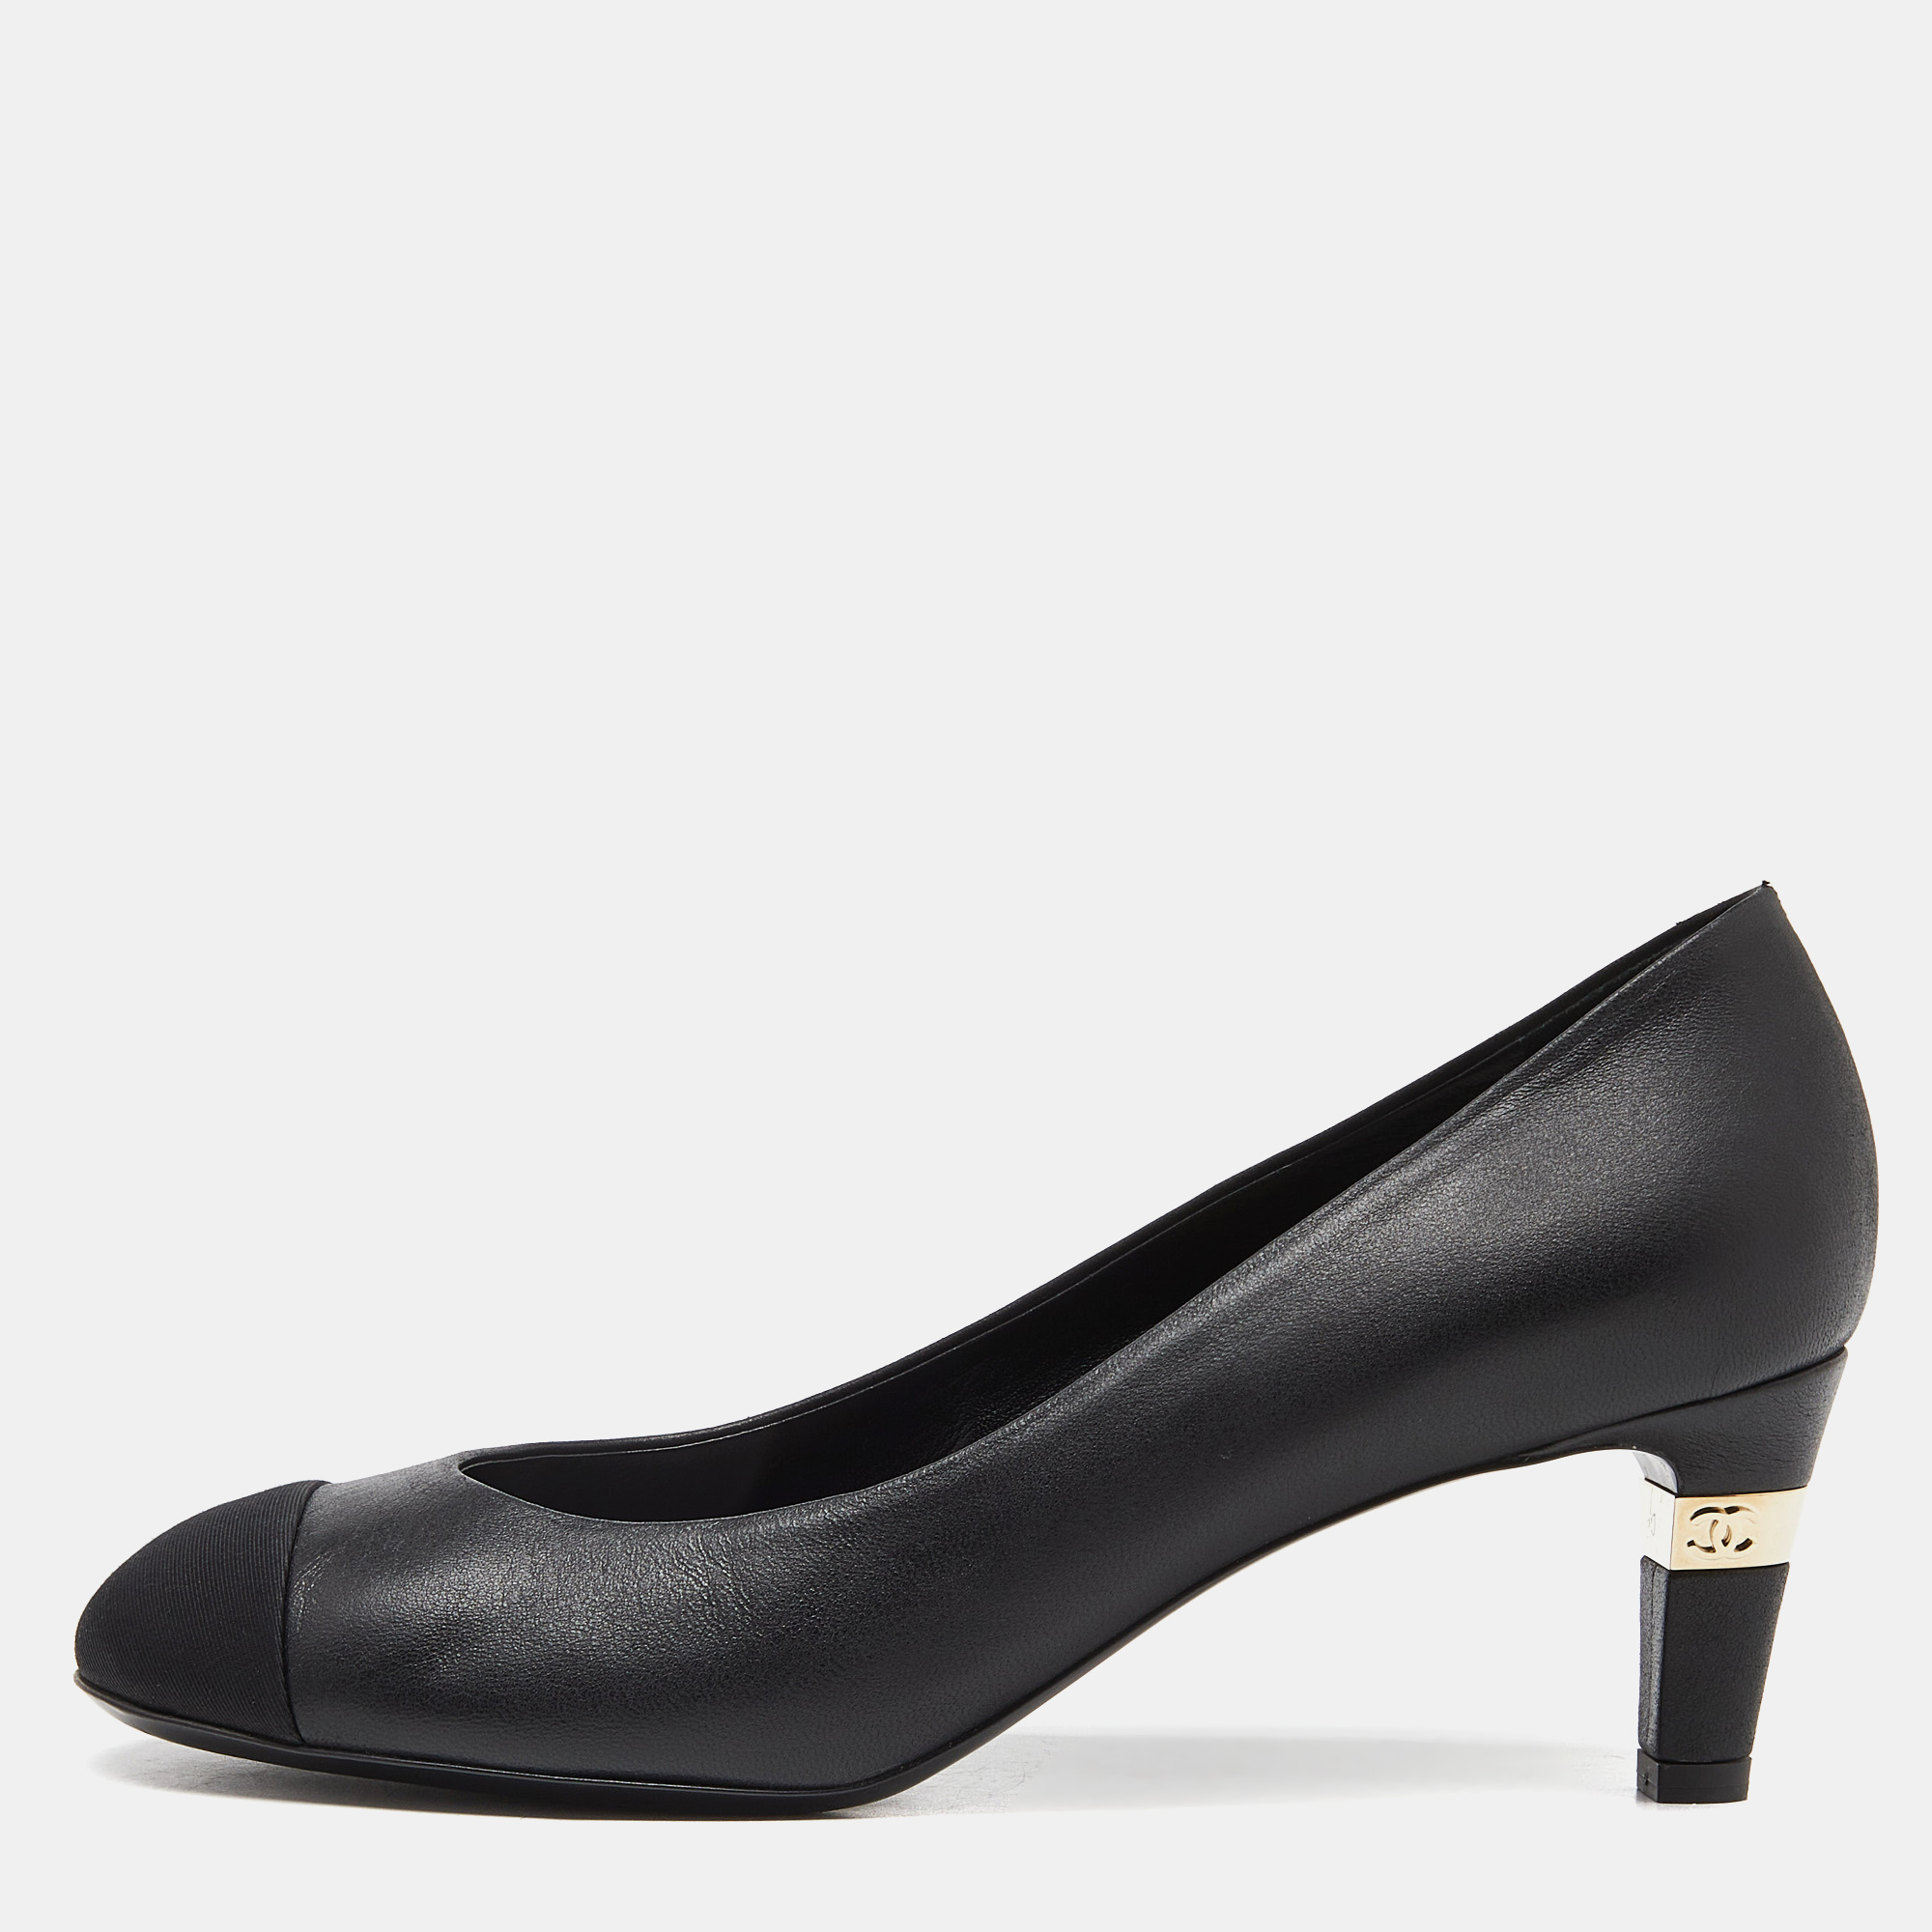 Chanel black leather and fabric cap toe pumps size 38.5